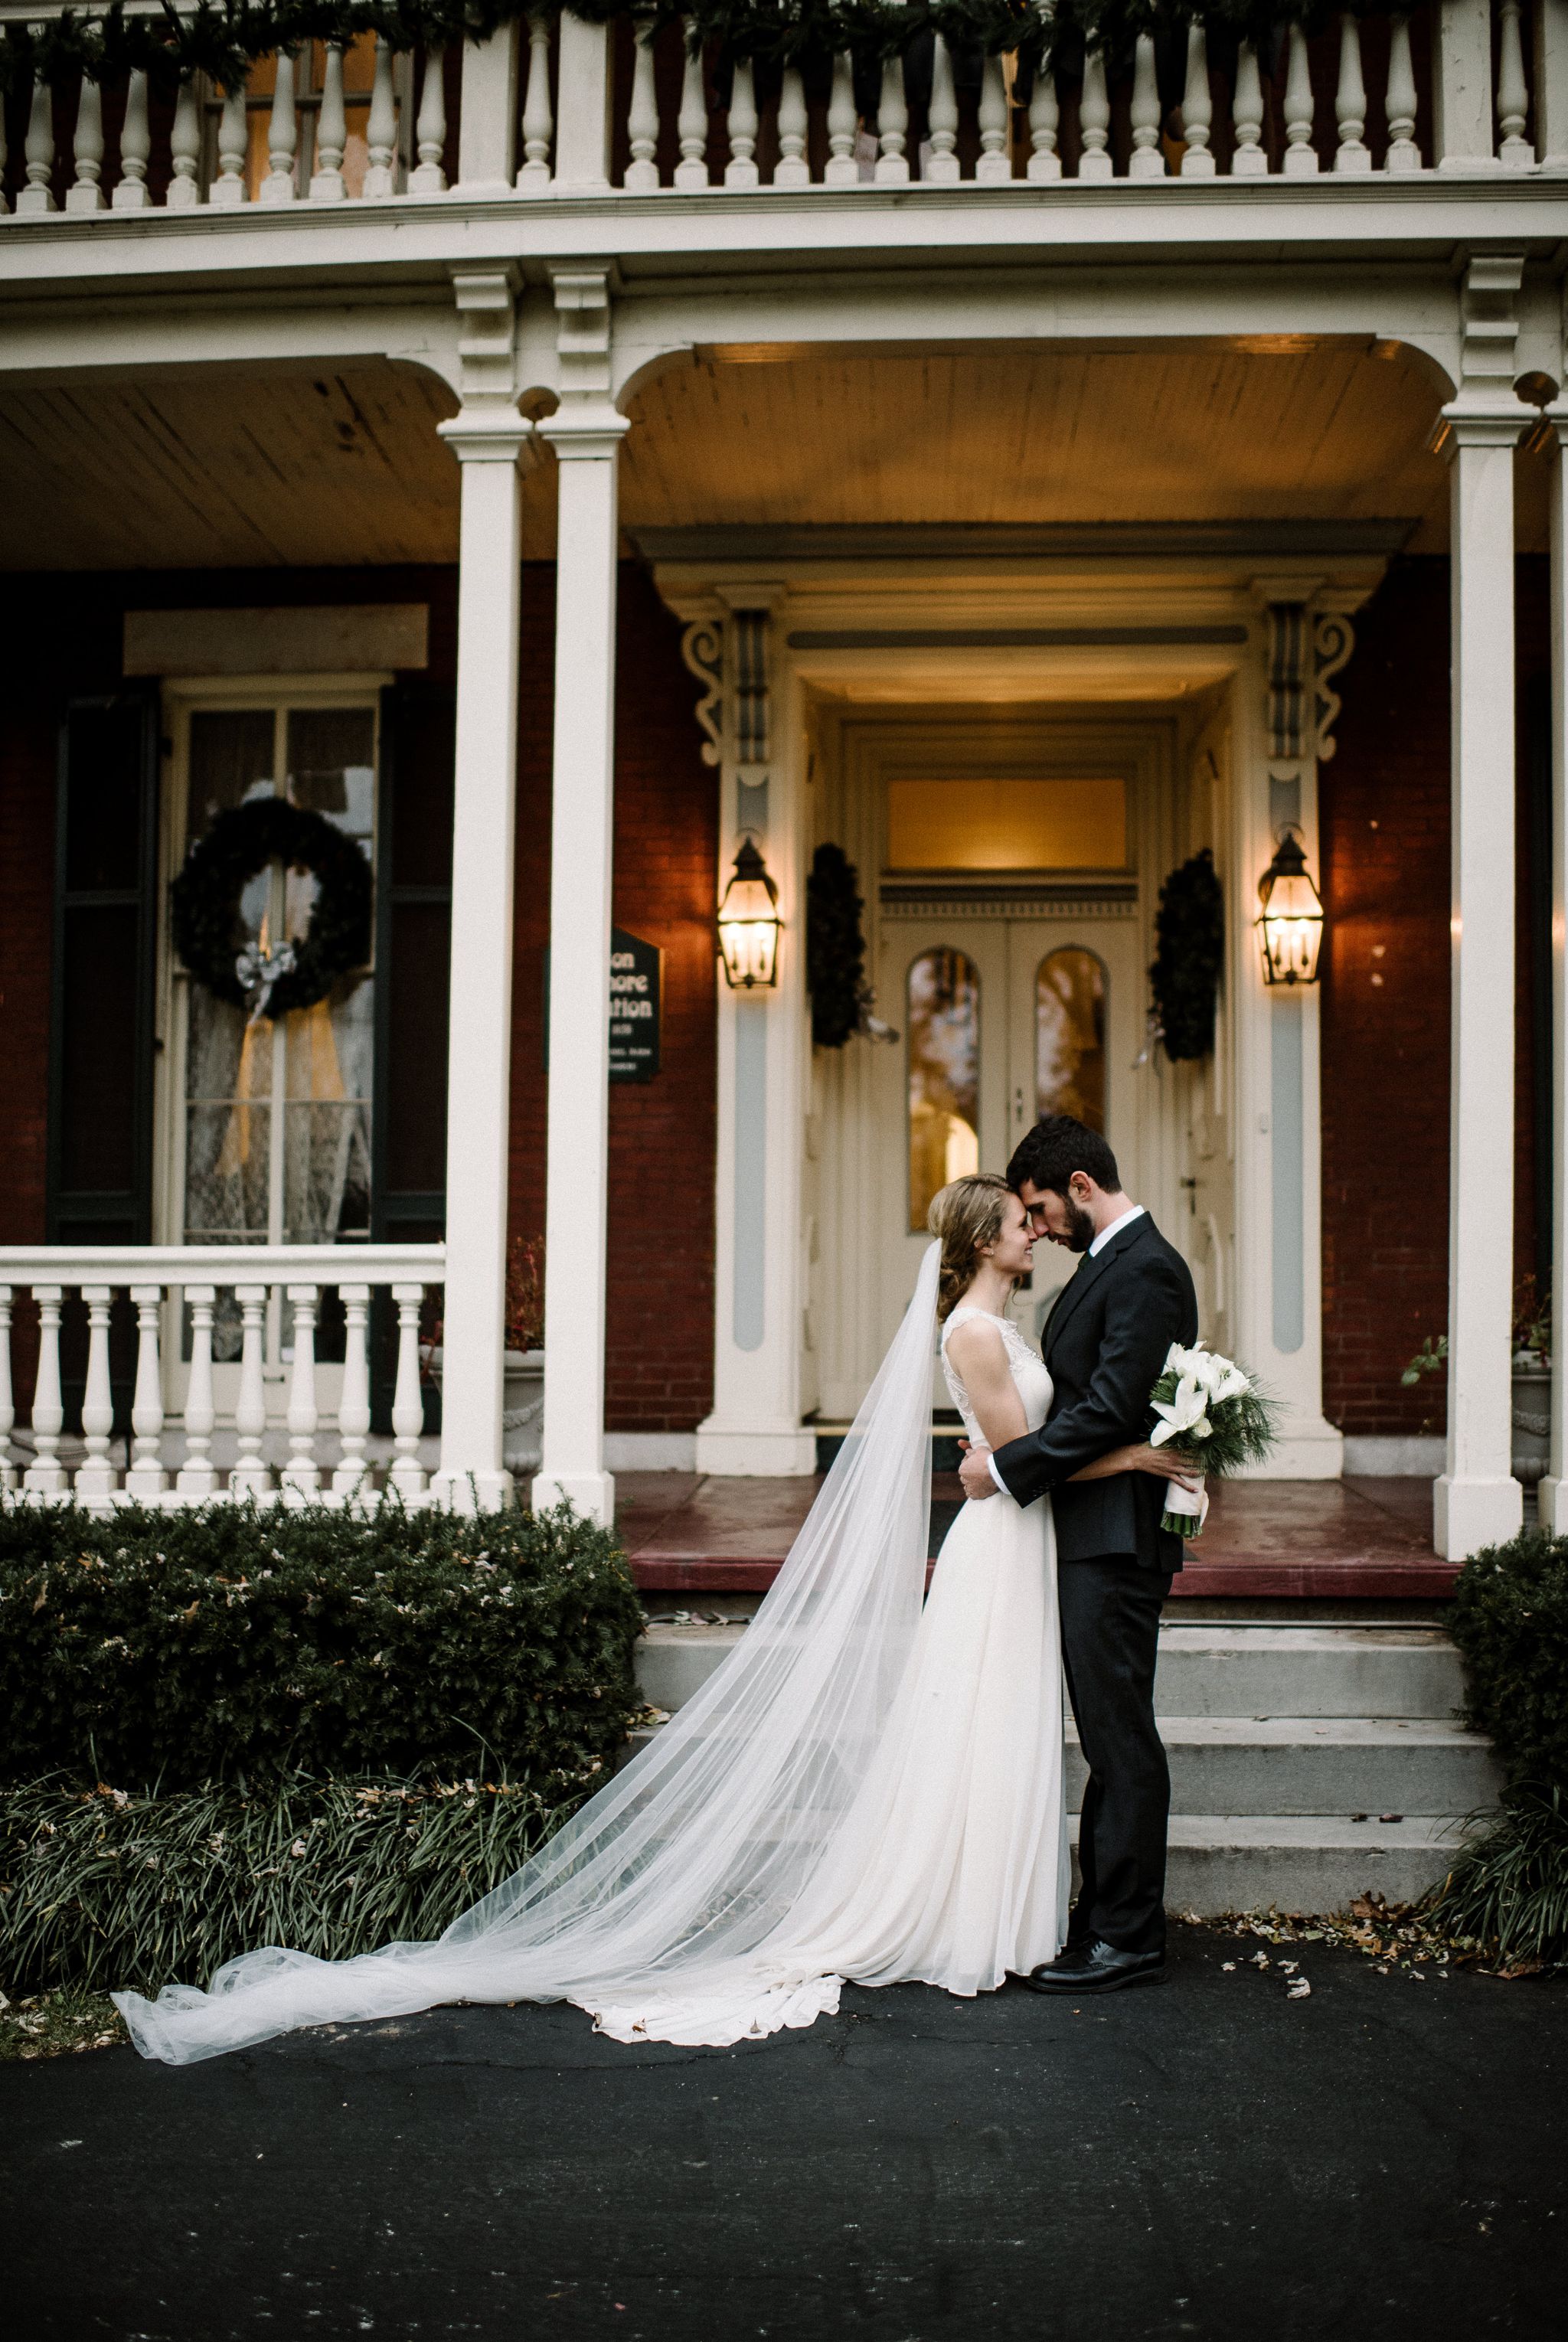 The bride and groom stand face to face near the front steps of the Larimore House. There are wreaths on the windows and front door. The bride is clutching her green and white bouquet. They are gazing into each others' eyes. 